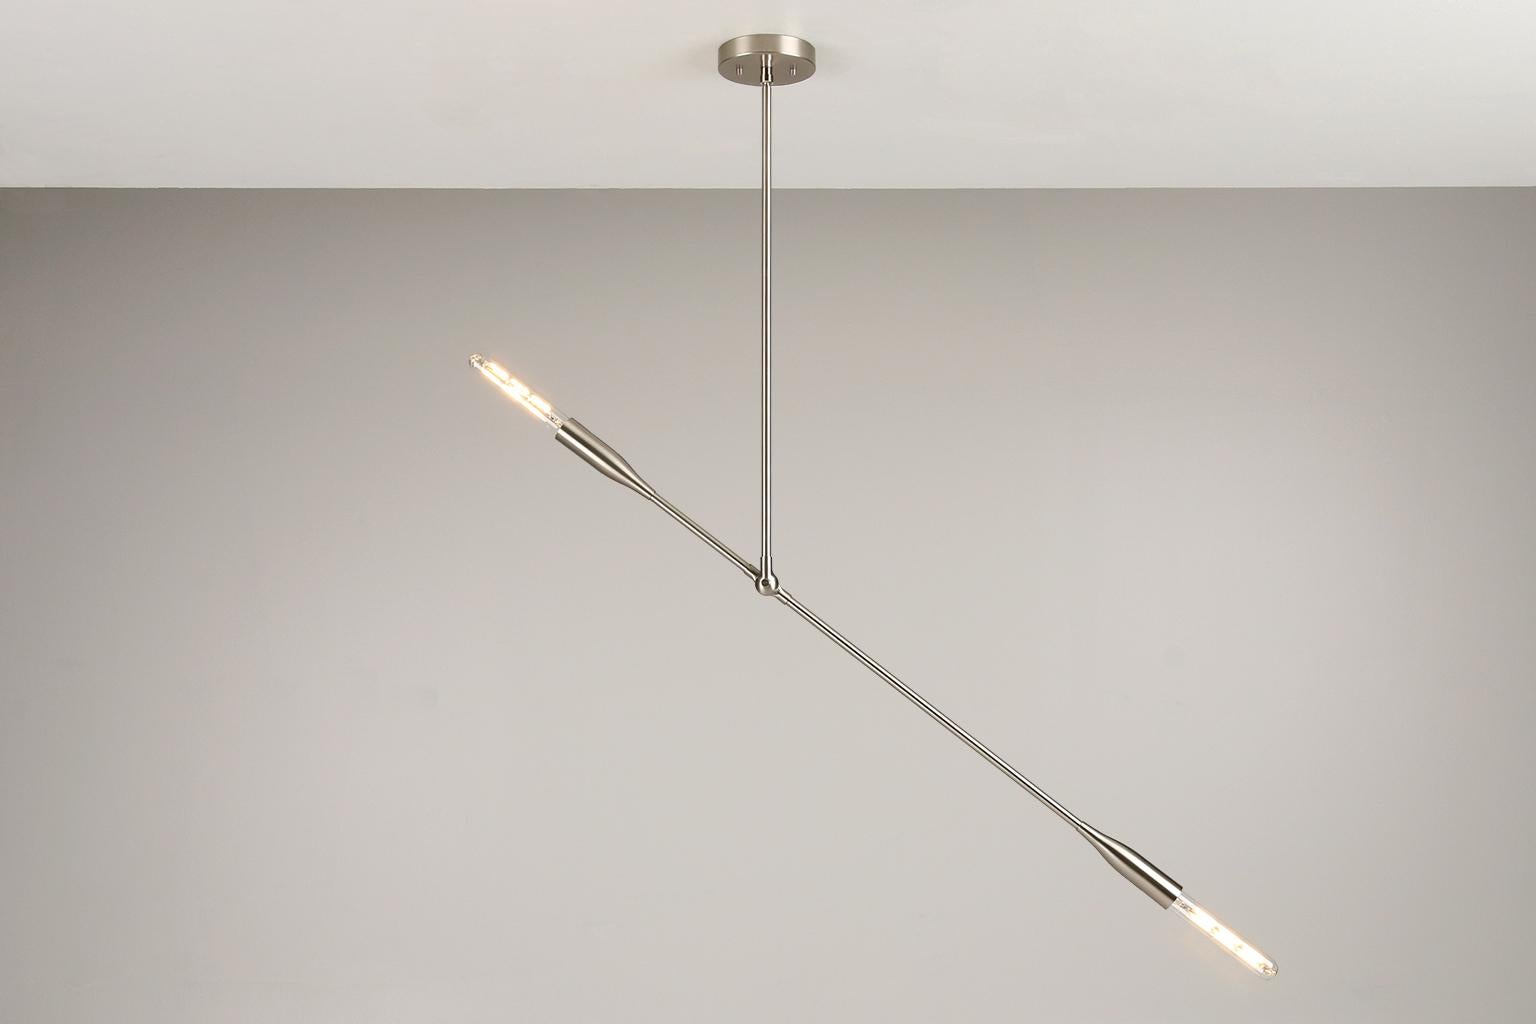 The Sorenthia Light is a modern, linear pendant with bold, elegant lines and dramatic negative space. One Sorenthia Light in Brushed Nickel is available now at a 50% discount. This is a floor model with minor finish flaws consistent with normal wear